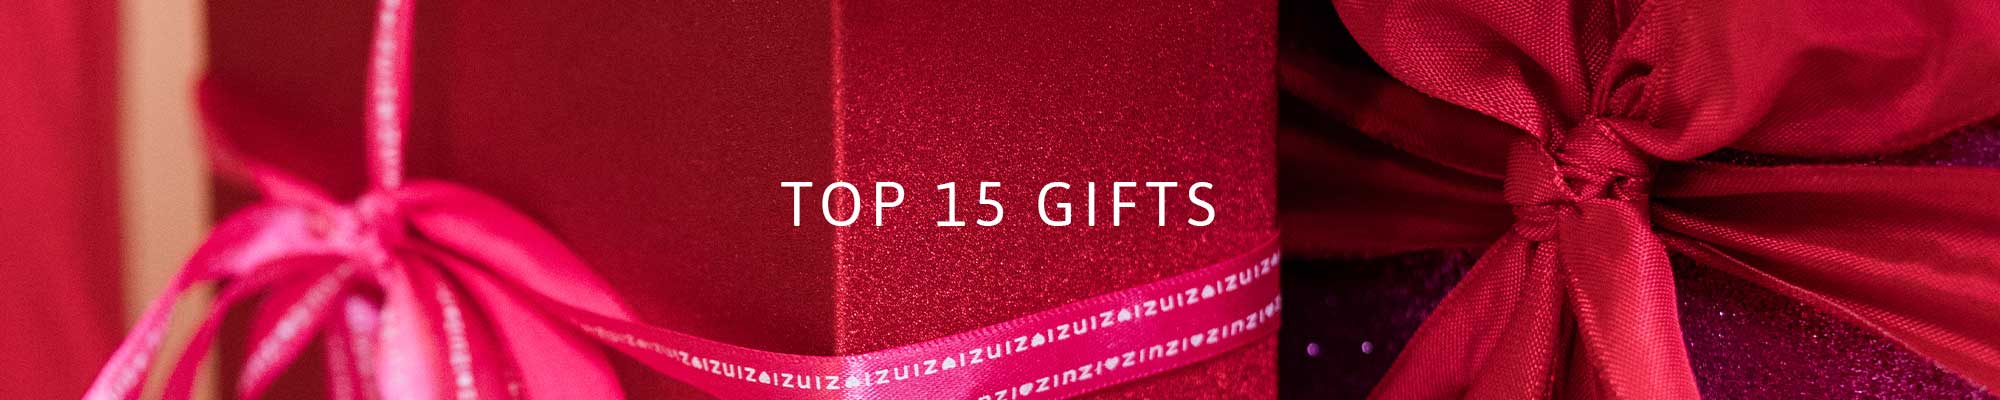 Top 15 Gifts